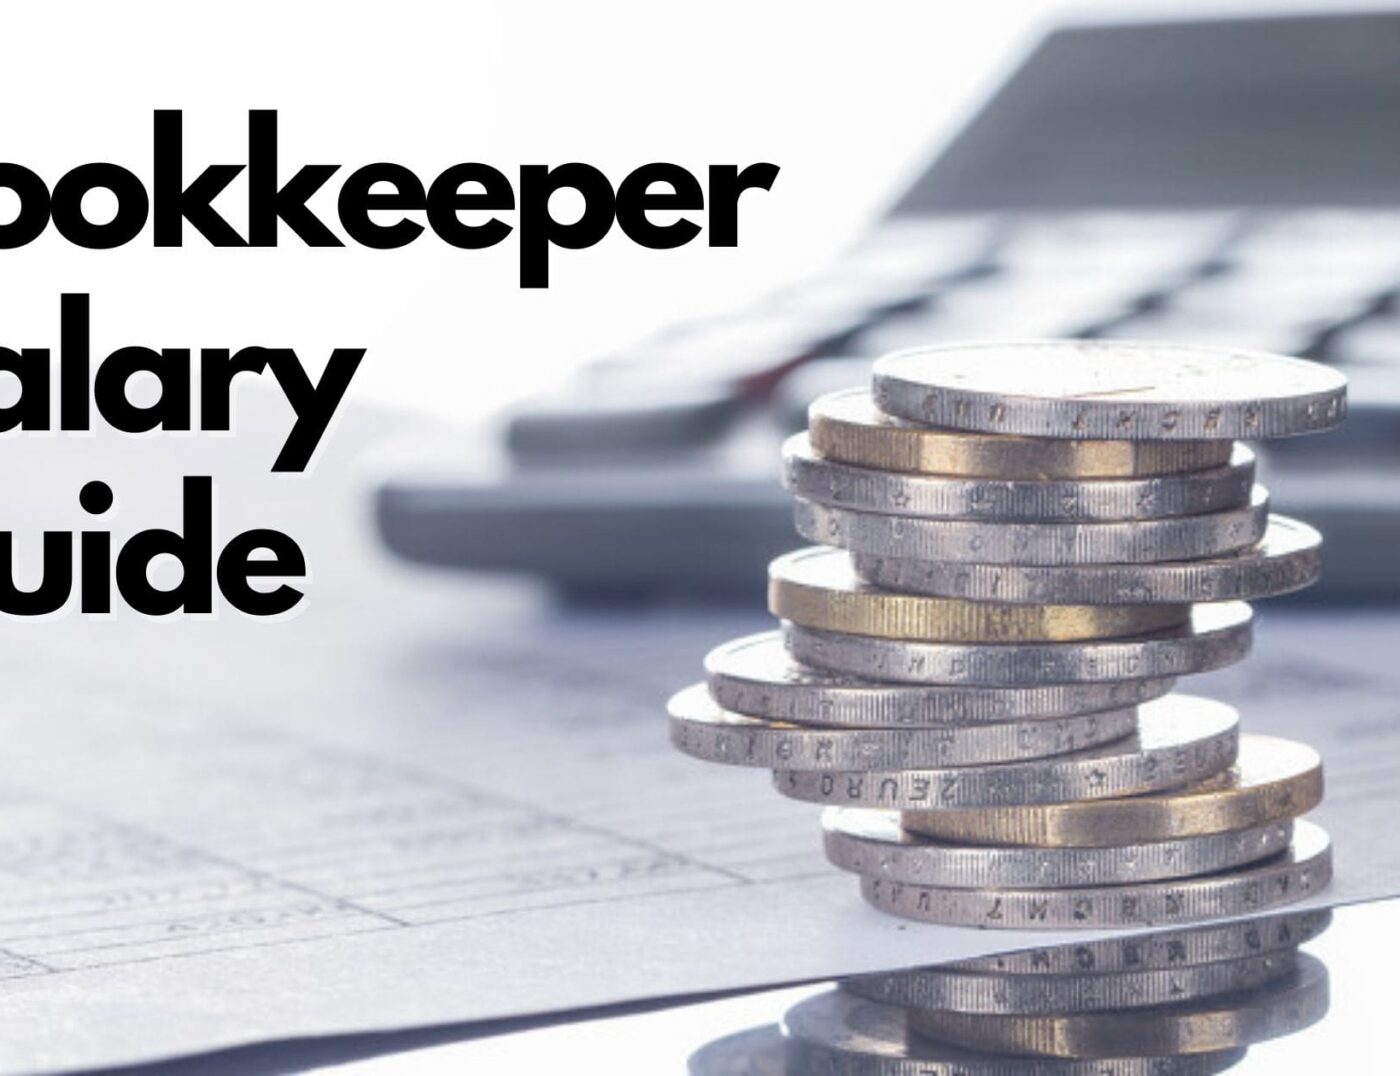 intuit bookkeeper salary